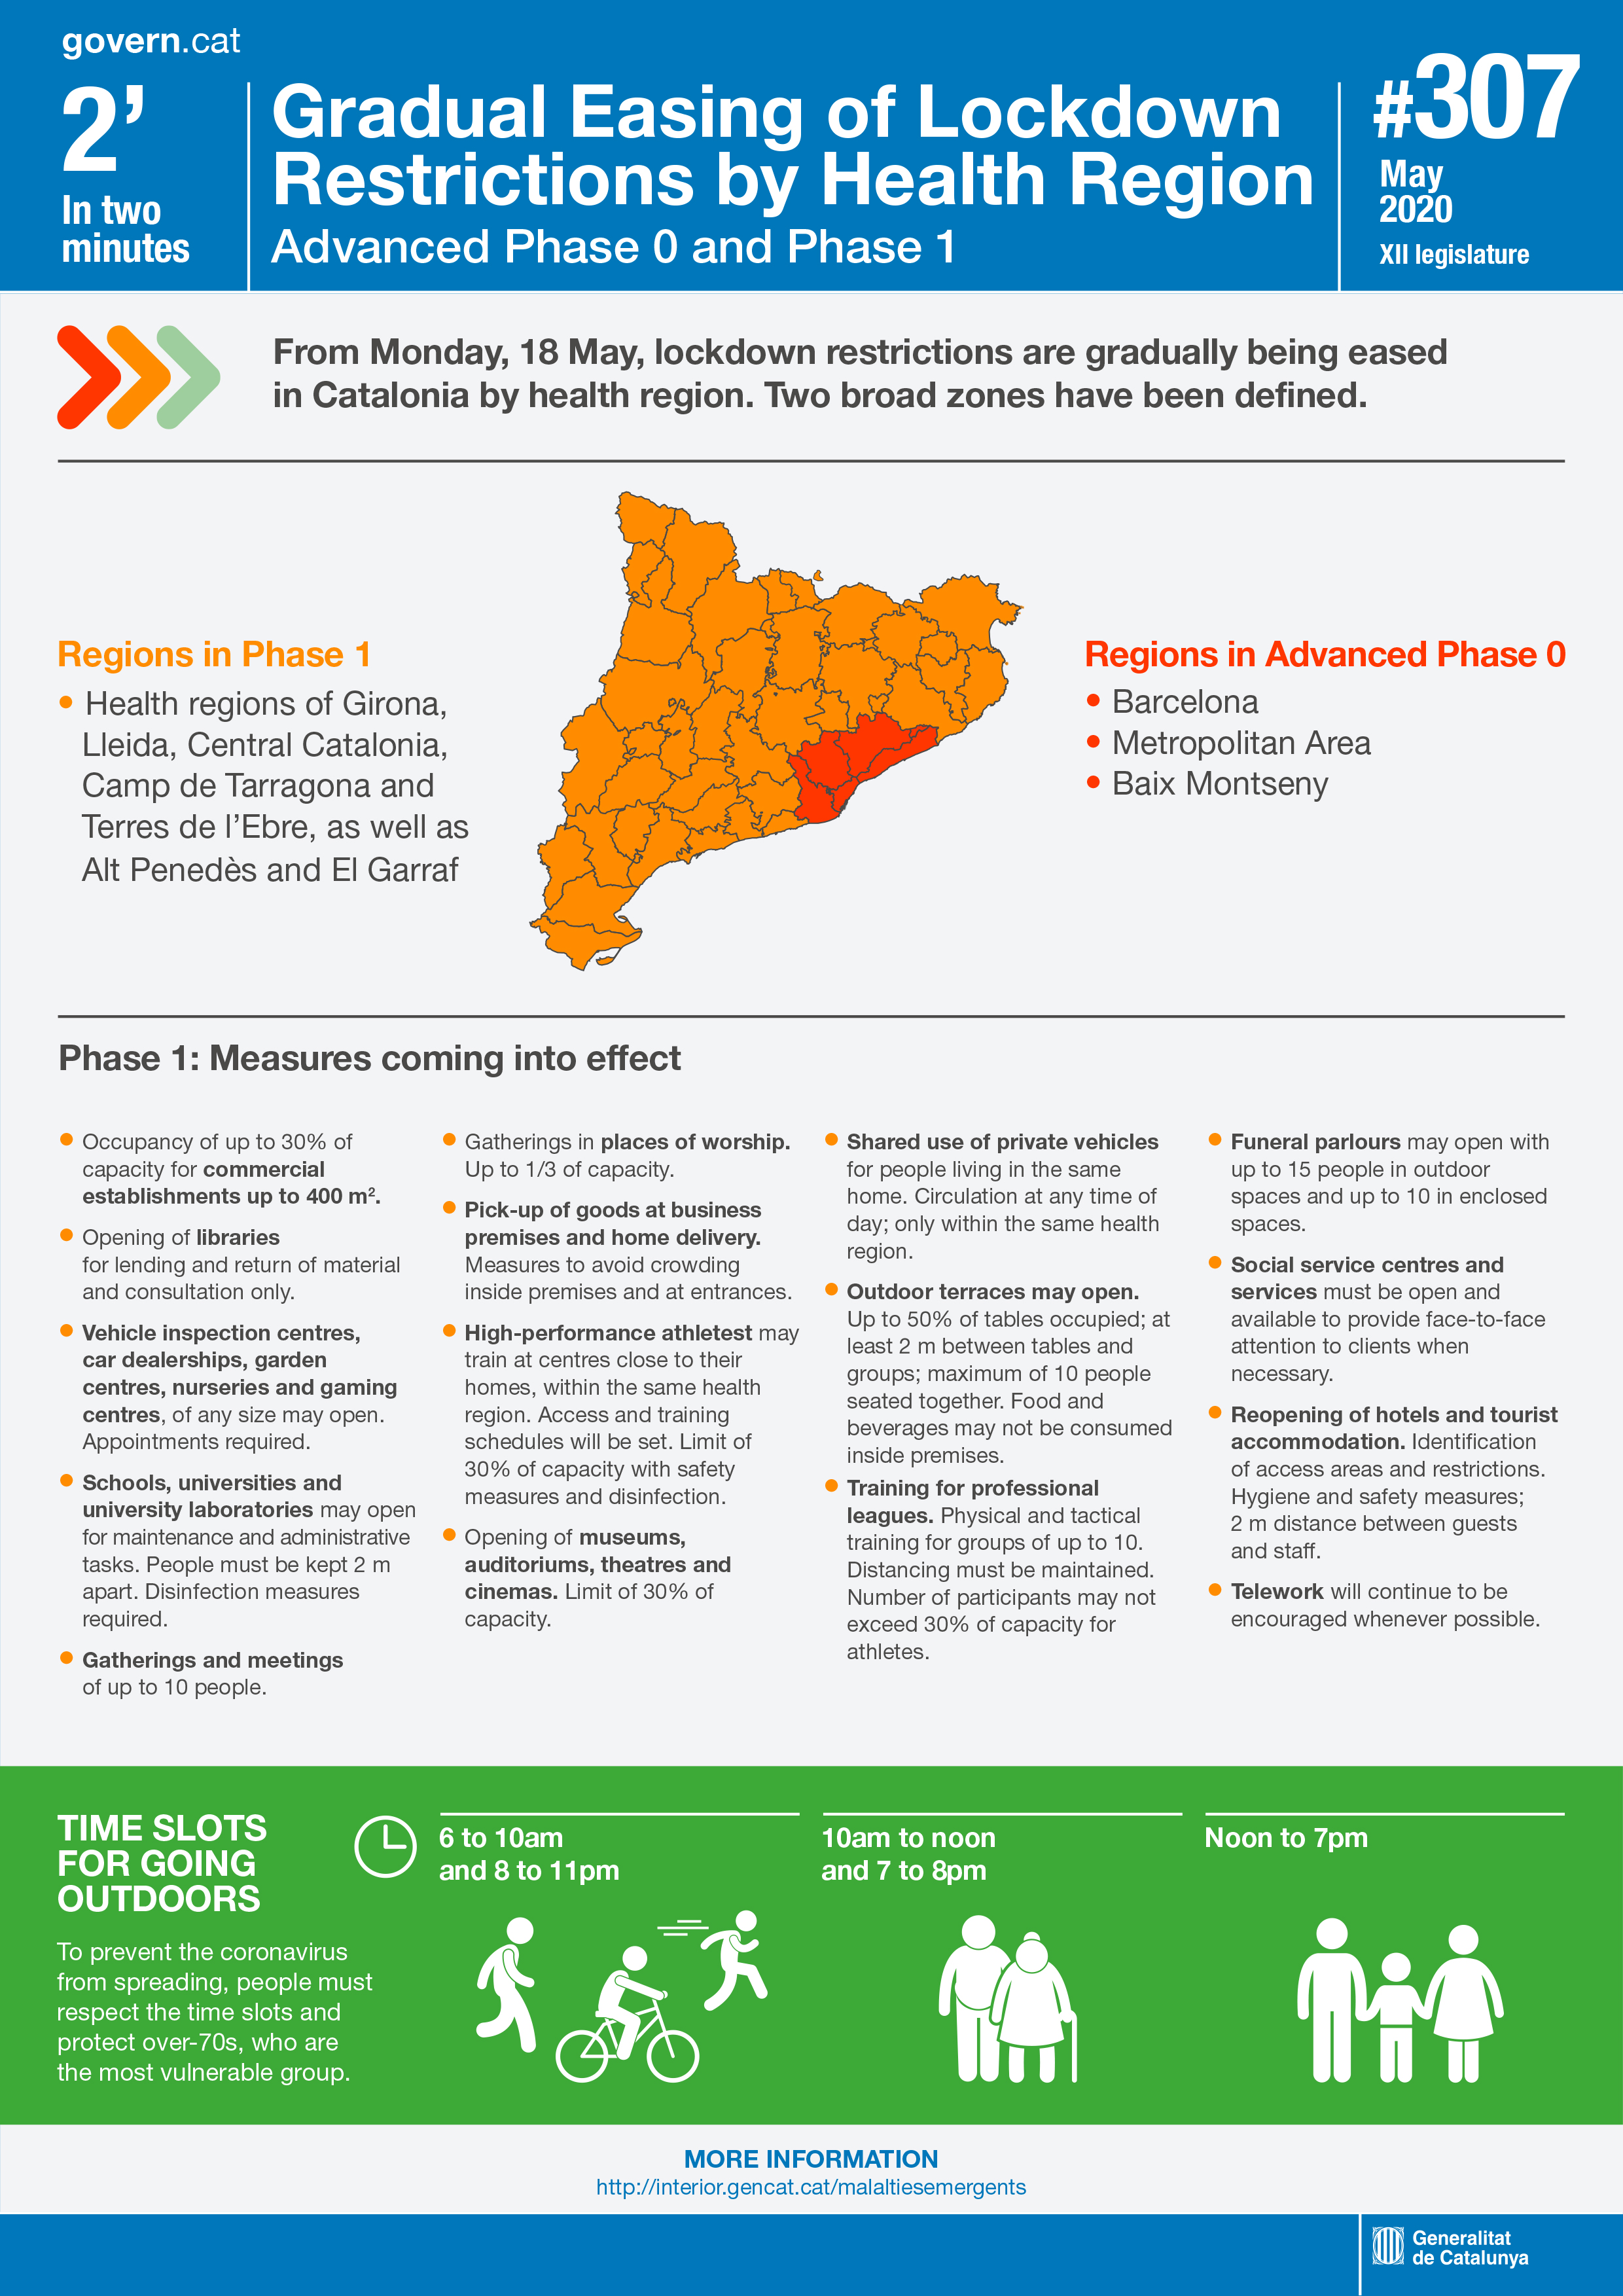 From Monday, 18 May, lockdown restrictions are gradually being eased in Catalonia by health region. Two broad zones have been defined.